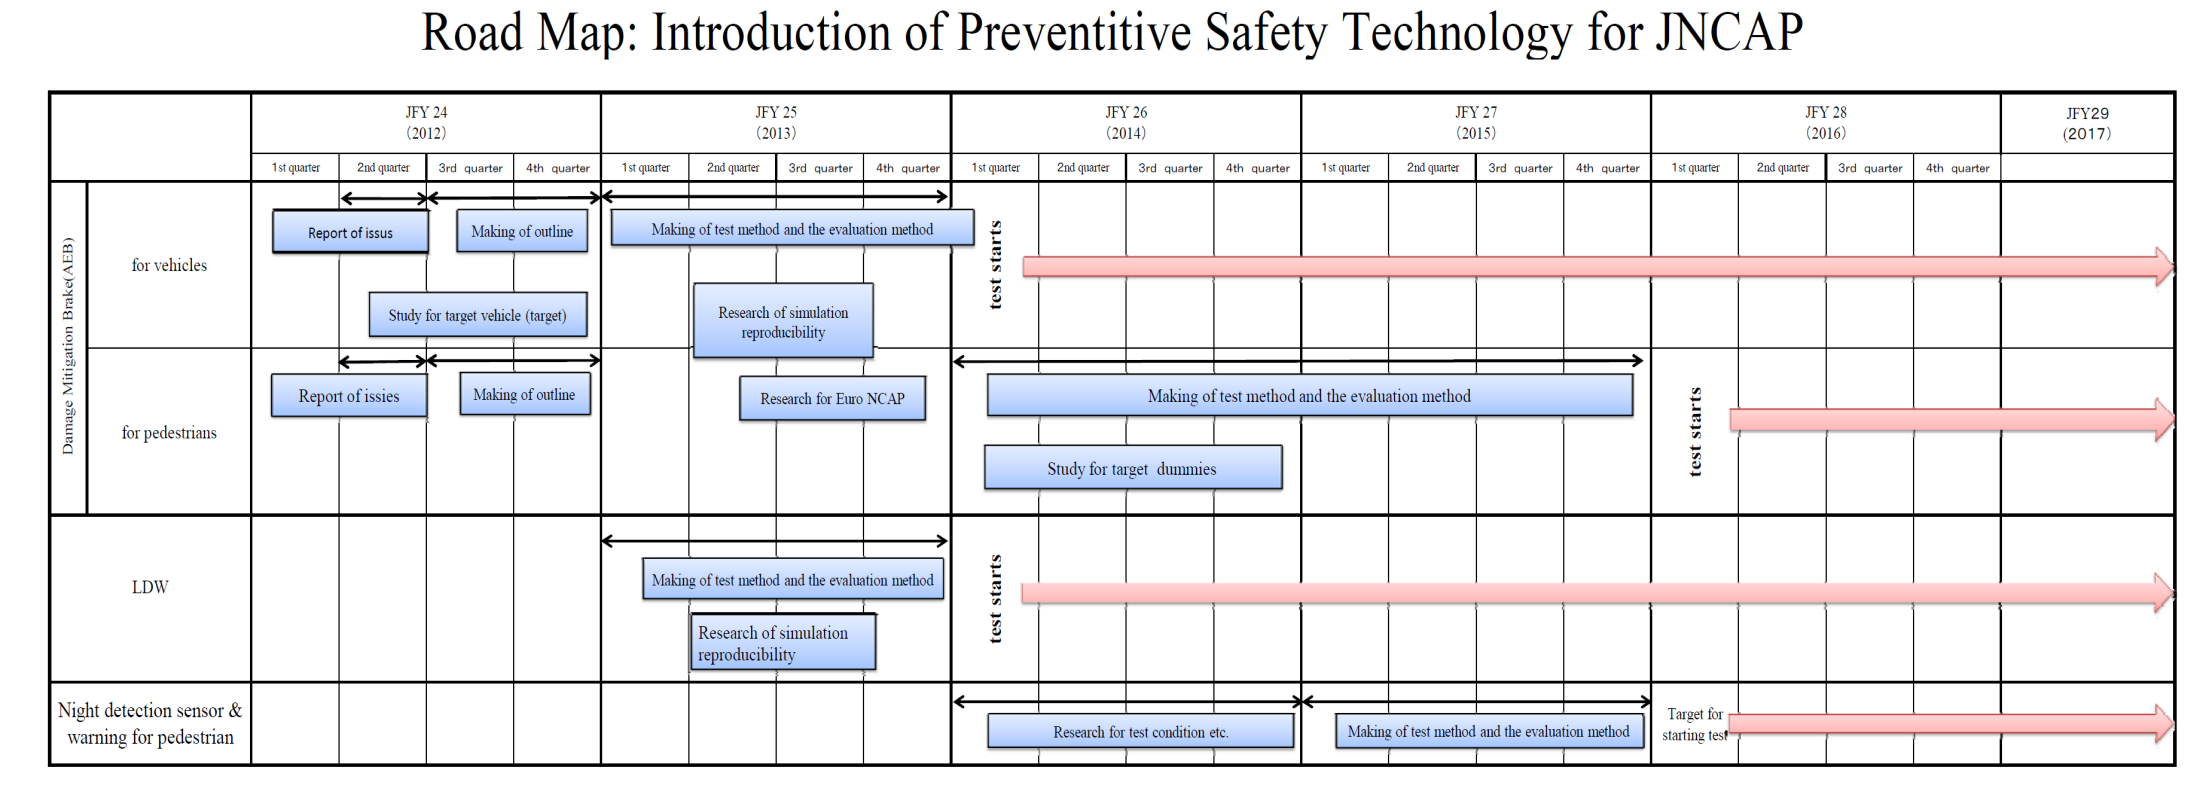 Introducing Active Safety Technologies into New Car Assessment AEBS for